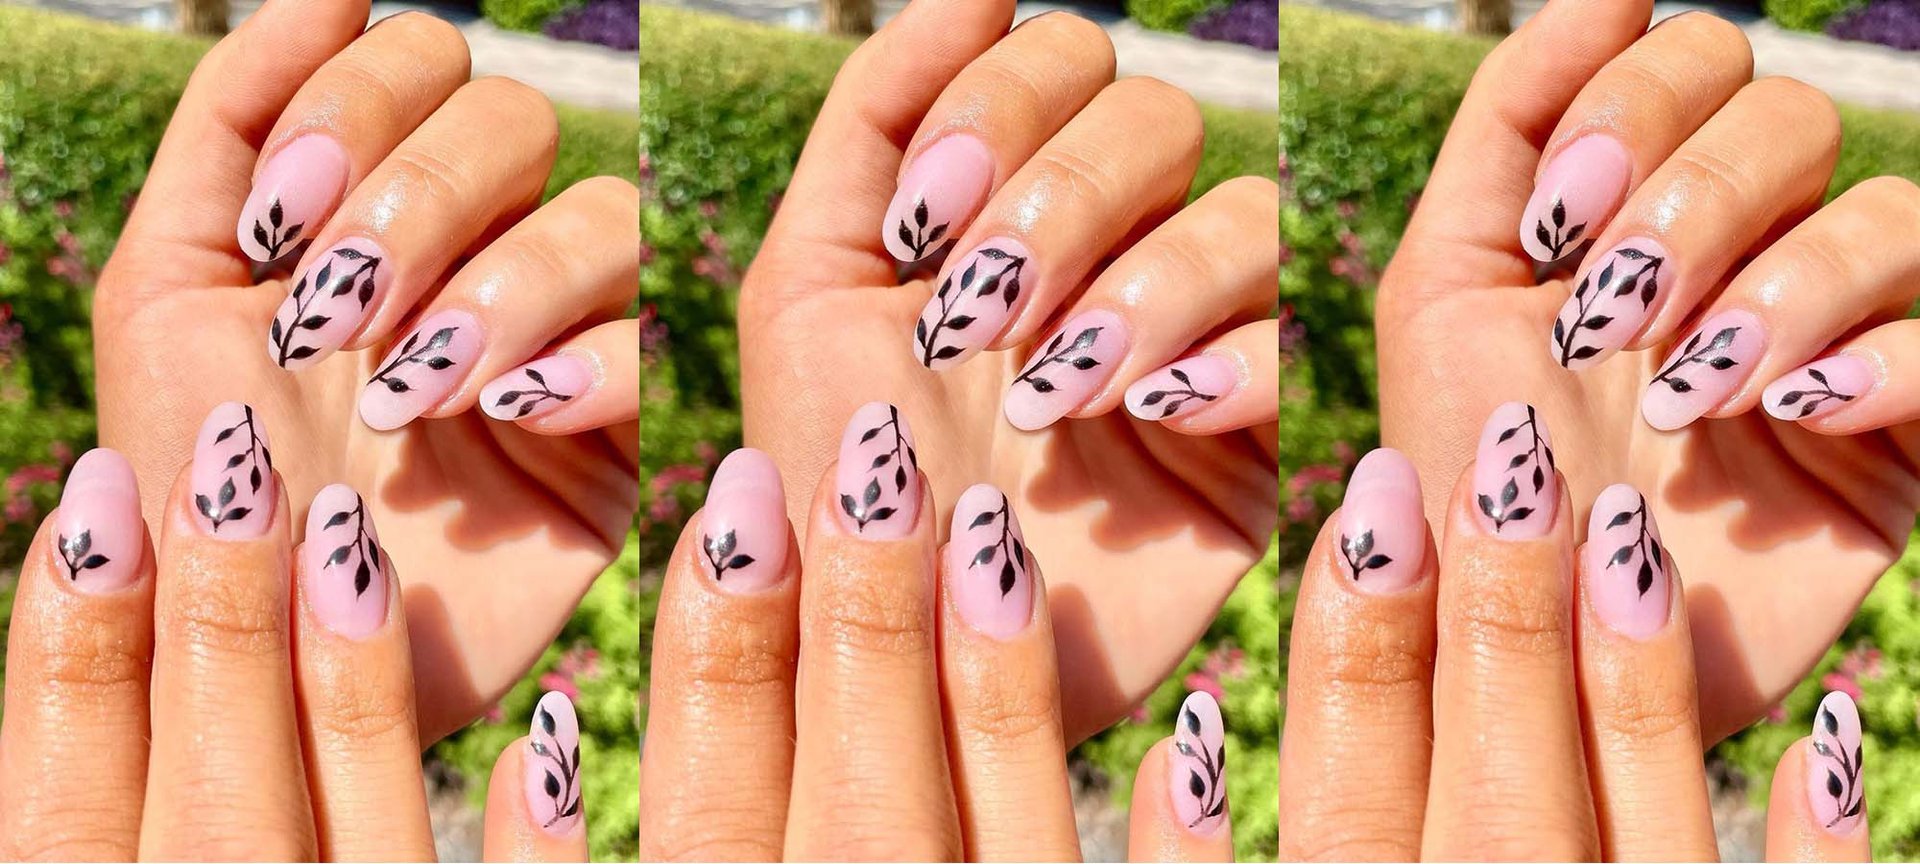 10 Black Nail Designs with Leopard Prints To Try Now | by Nailkicks | Medium